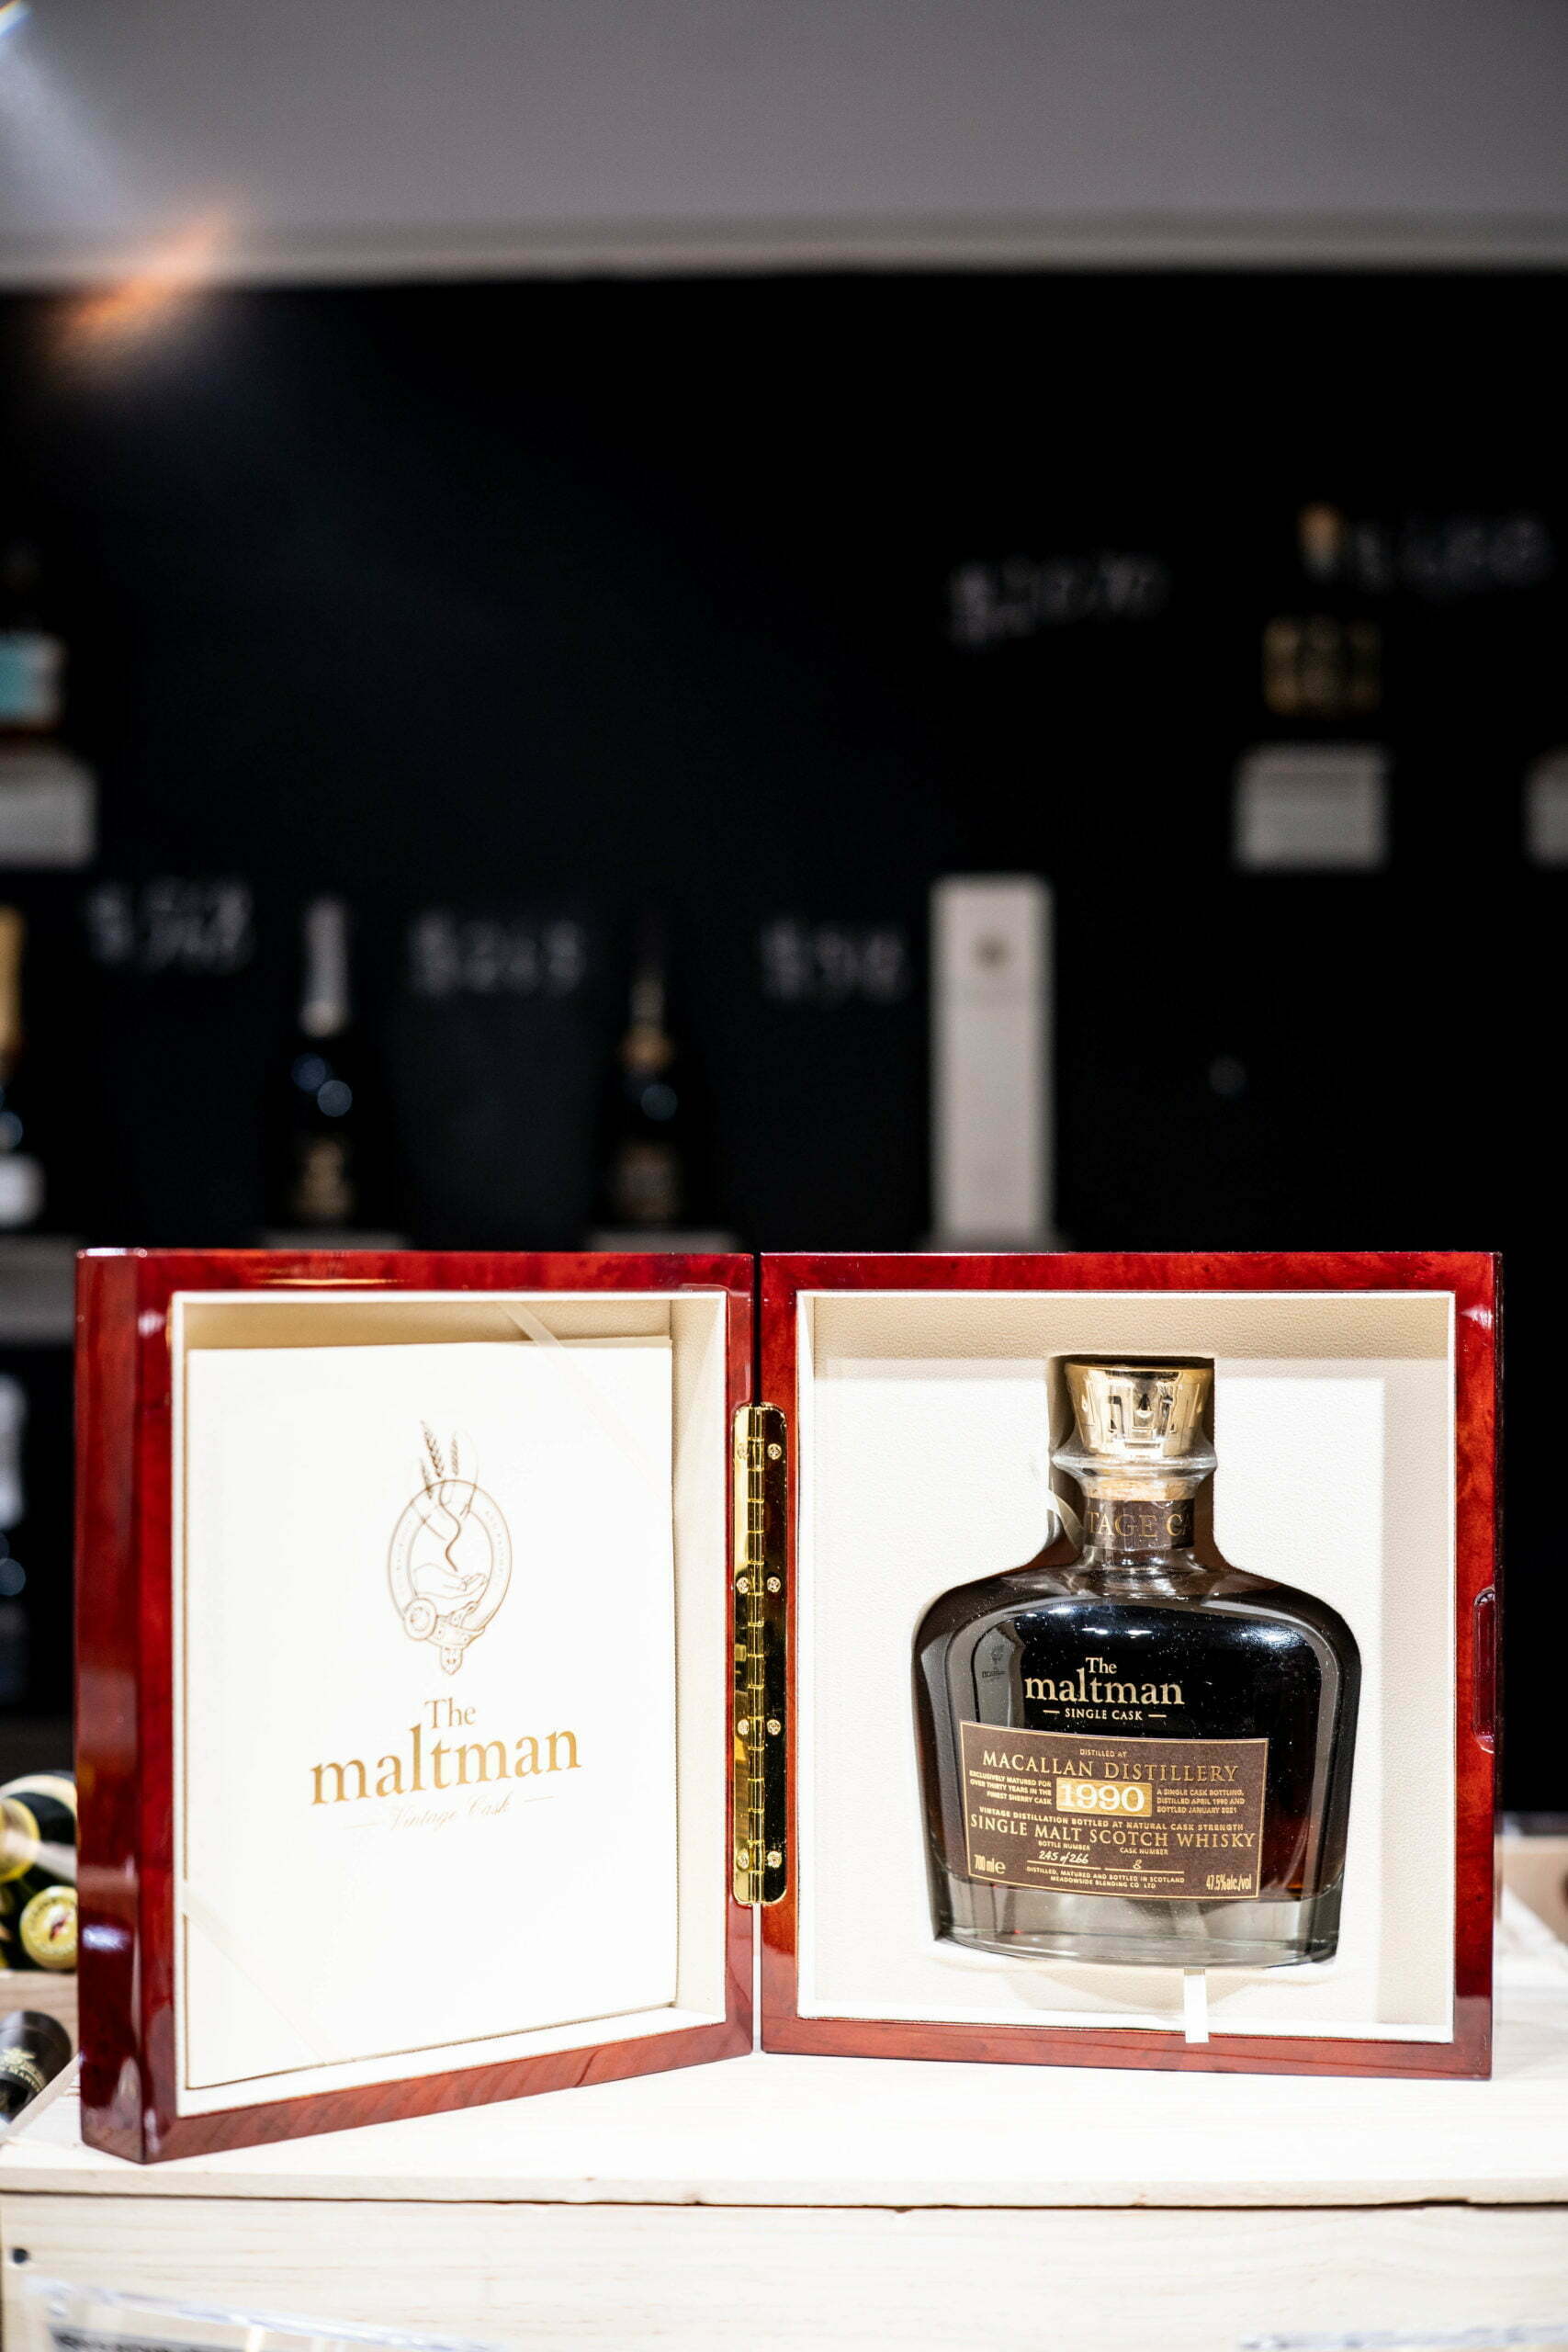 The Maltman Macallan Over 30 Year Old 1990-2021 Cask No. 8 Limited Edition (1x70cl) - TwoMoreGlasses.com